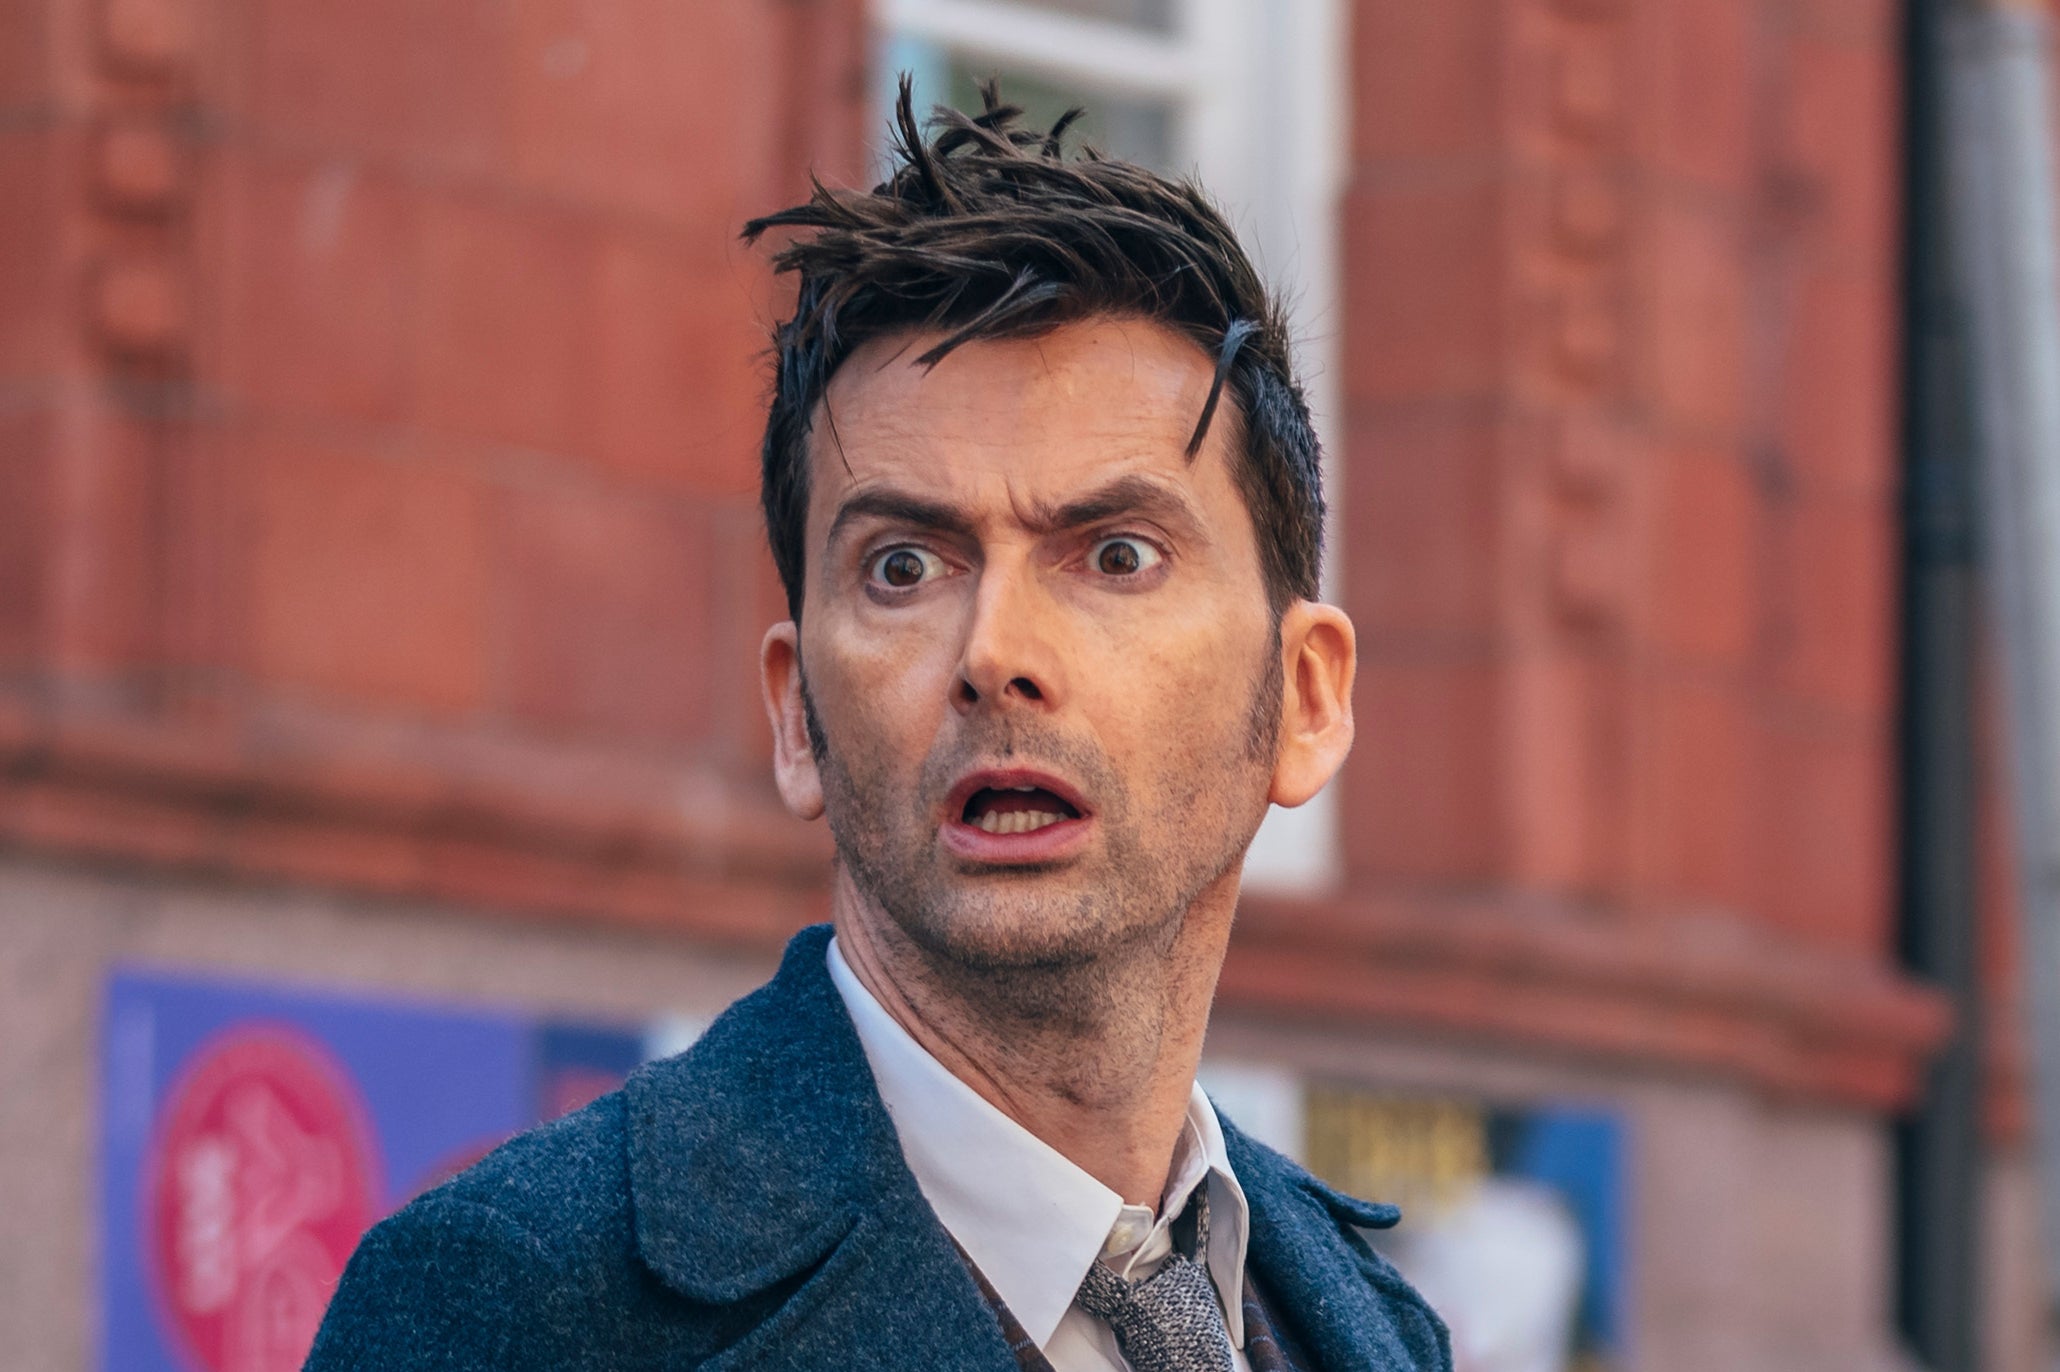 David Tennant as the Doctor on BBC’s long-running show